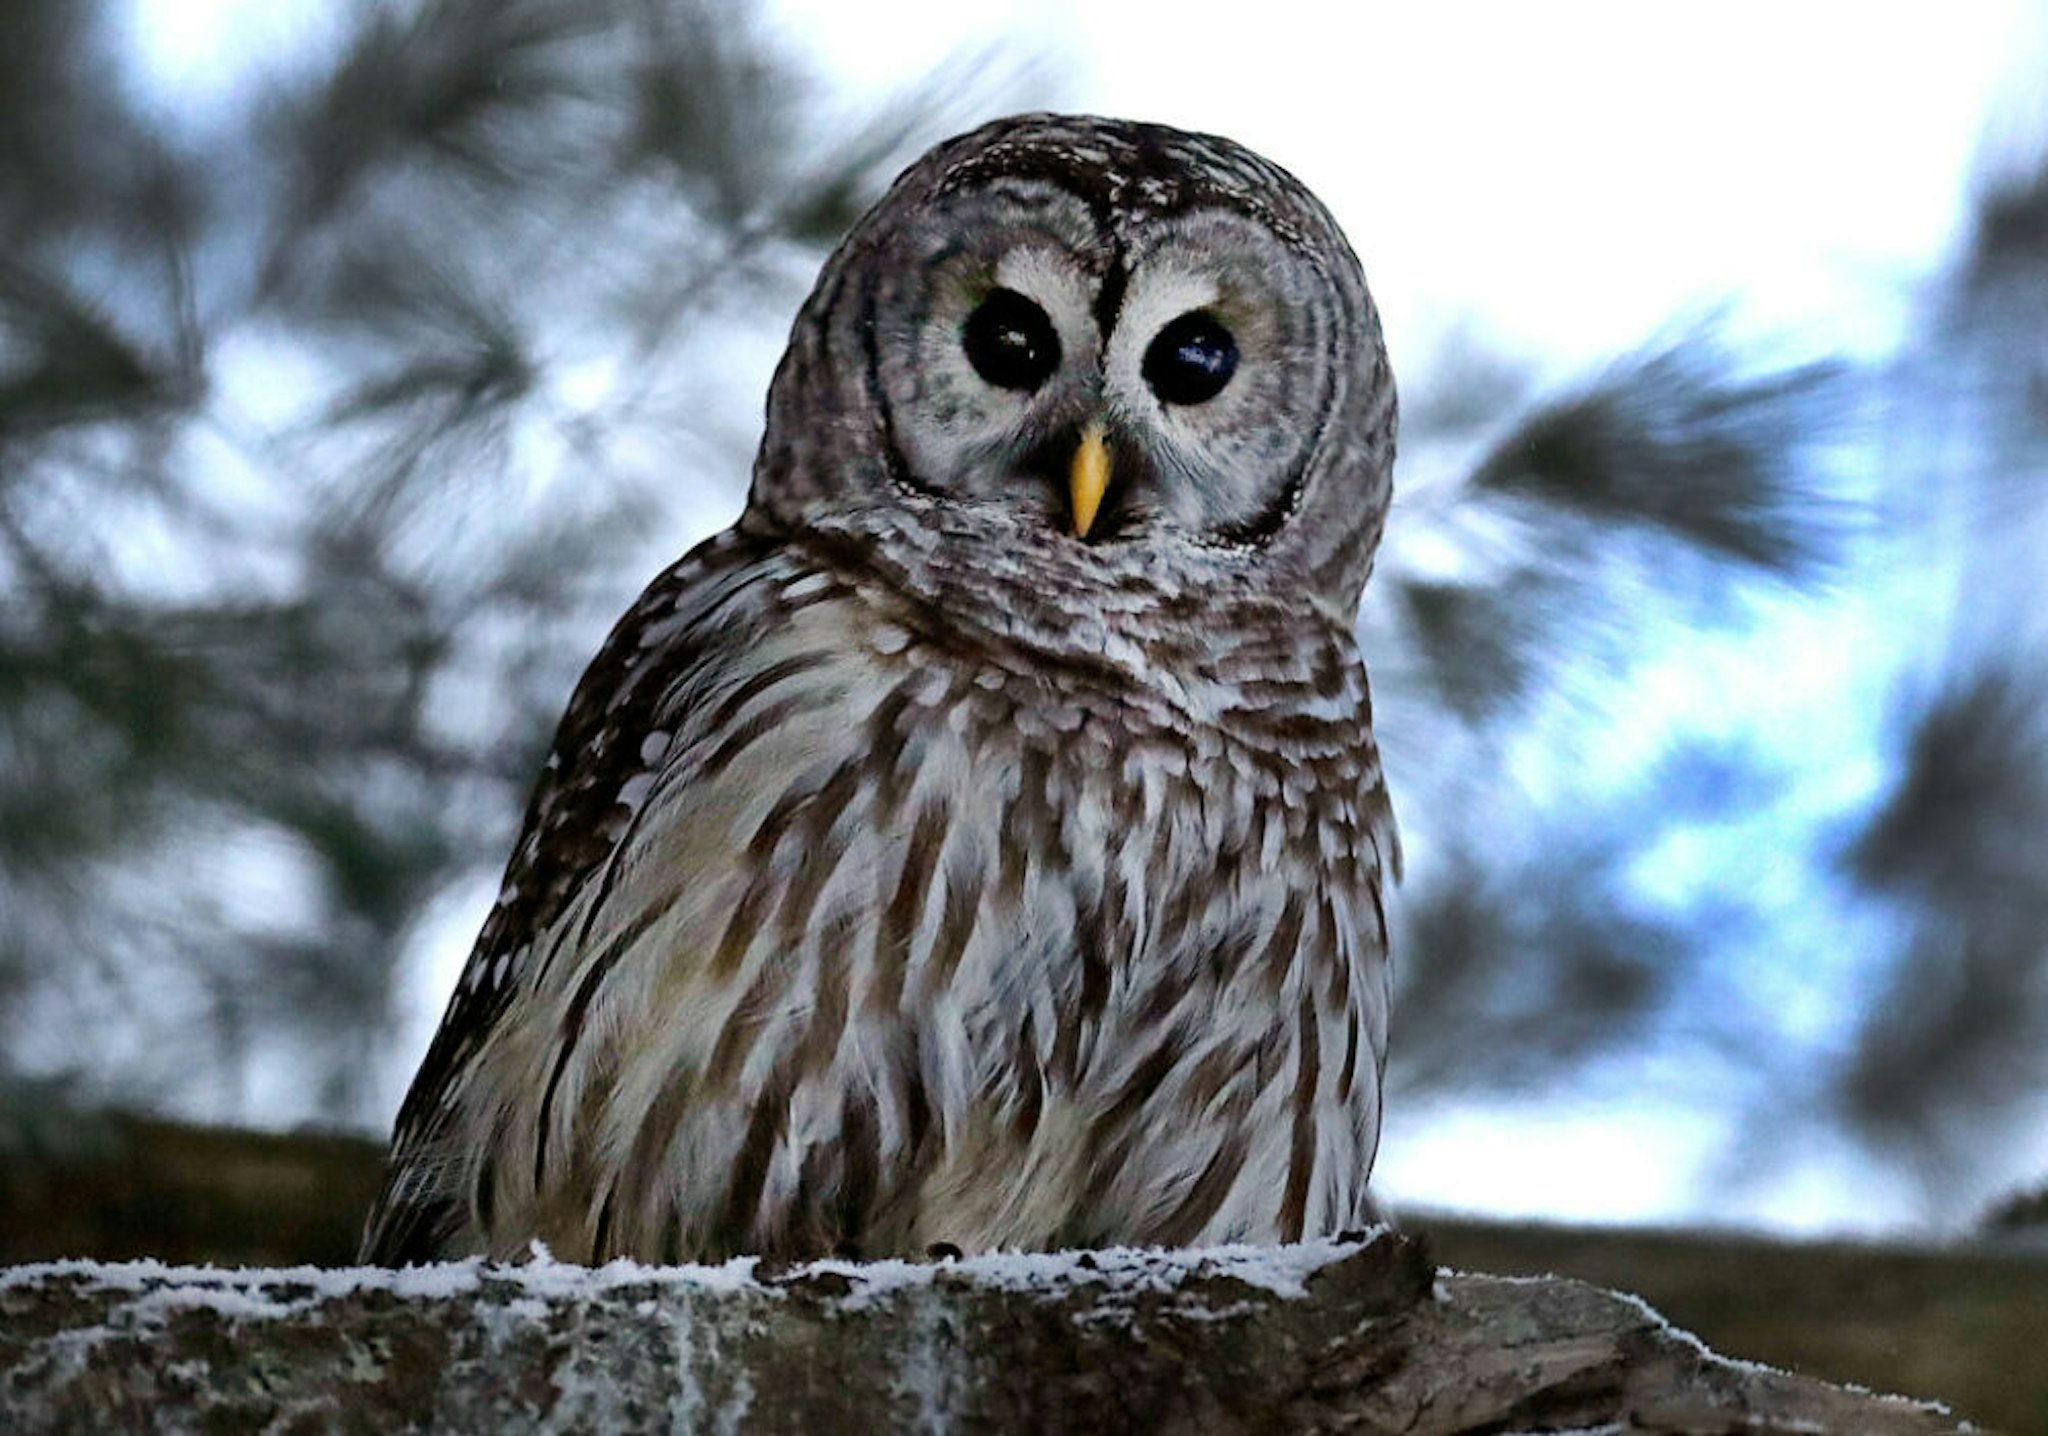 HOPKINTON - JANUARY 26: A barred owl struck by a car in Hopkinton on January 3, and rehabilitated at the Tufts Wildlife Clinic with an eye injury, is released by Westborough Animal Control Officer Melinda MacKendrick at Whitehall State Park in Hopkinton, MA on Jan. 26, 2021. The owl received oxygen, eye medication and fluids after it was brought in by a good Samaritan to the Tufts Wildlife Clinic.